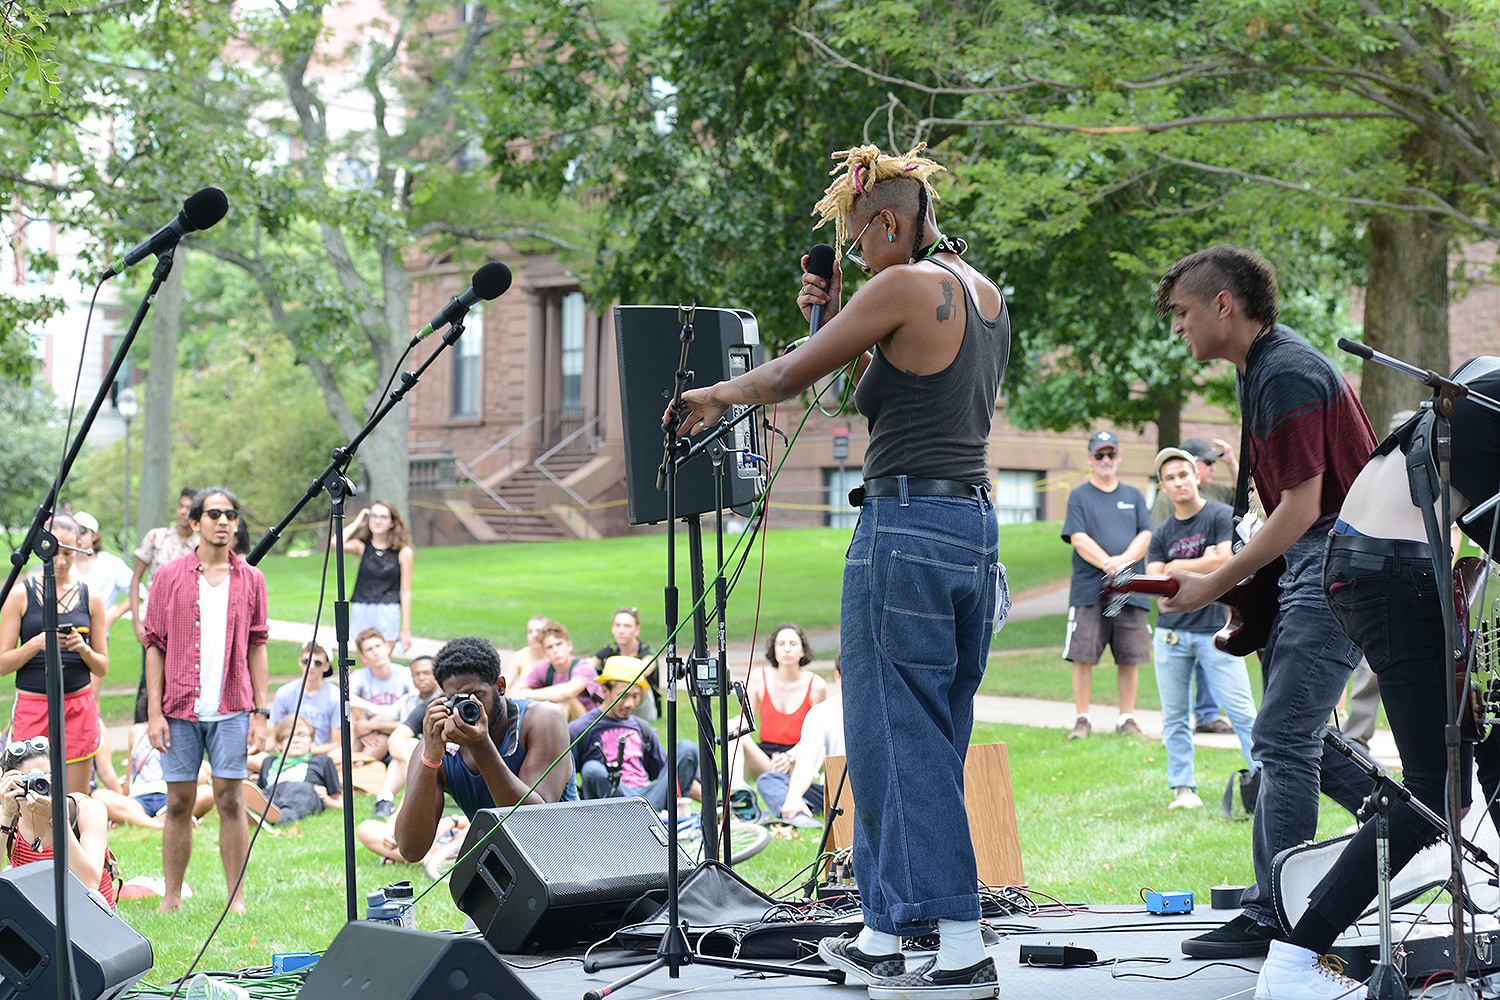 The MASH at Wesleyan University, Sept. 9. (Photo by Will Barr '18)